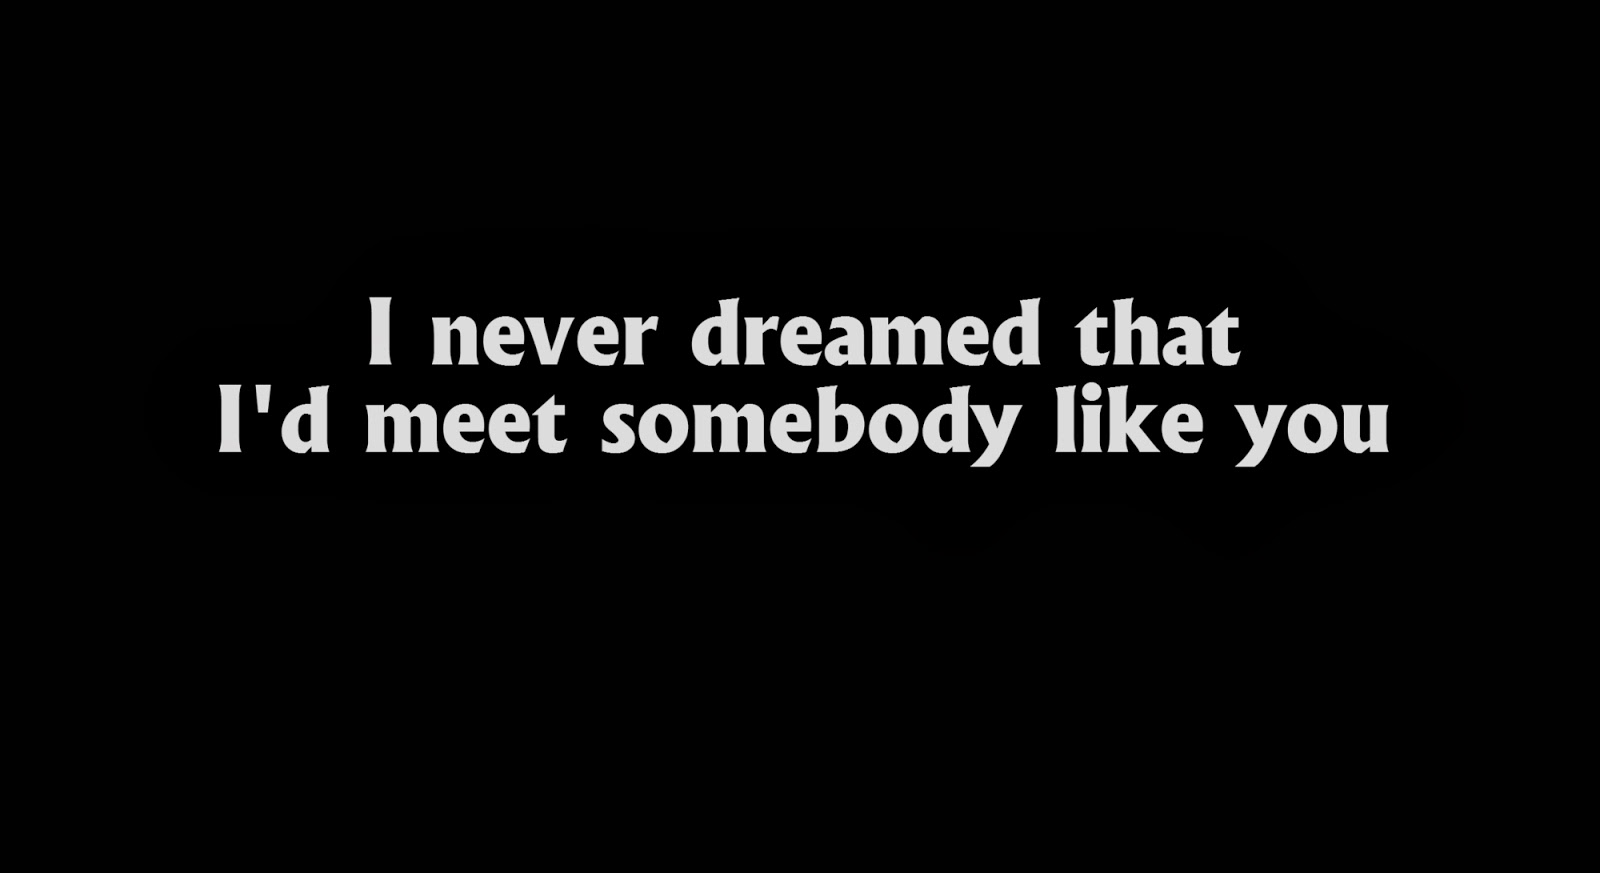 I never dreamed that I'd meet somebody like you.